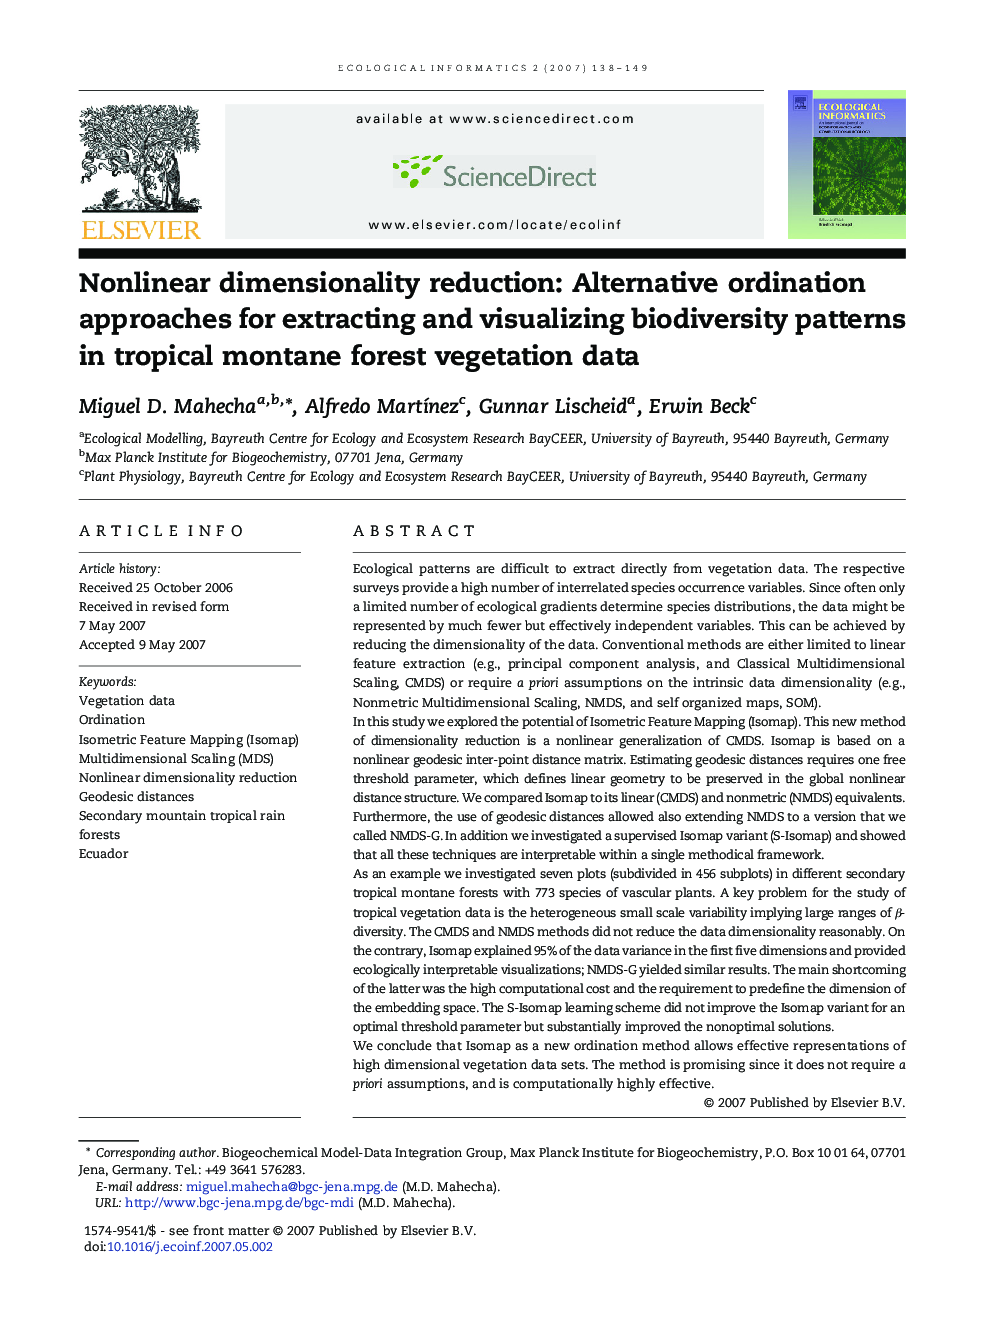 Nonlinear dimensionality reduction: Alternative ordination approaches for extracting and visualizing biodiversity patterns in tropical montane forest vegetation data